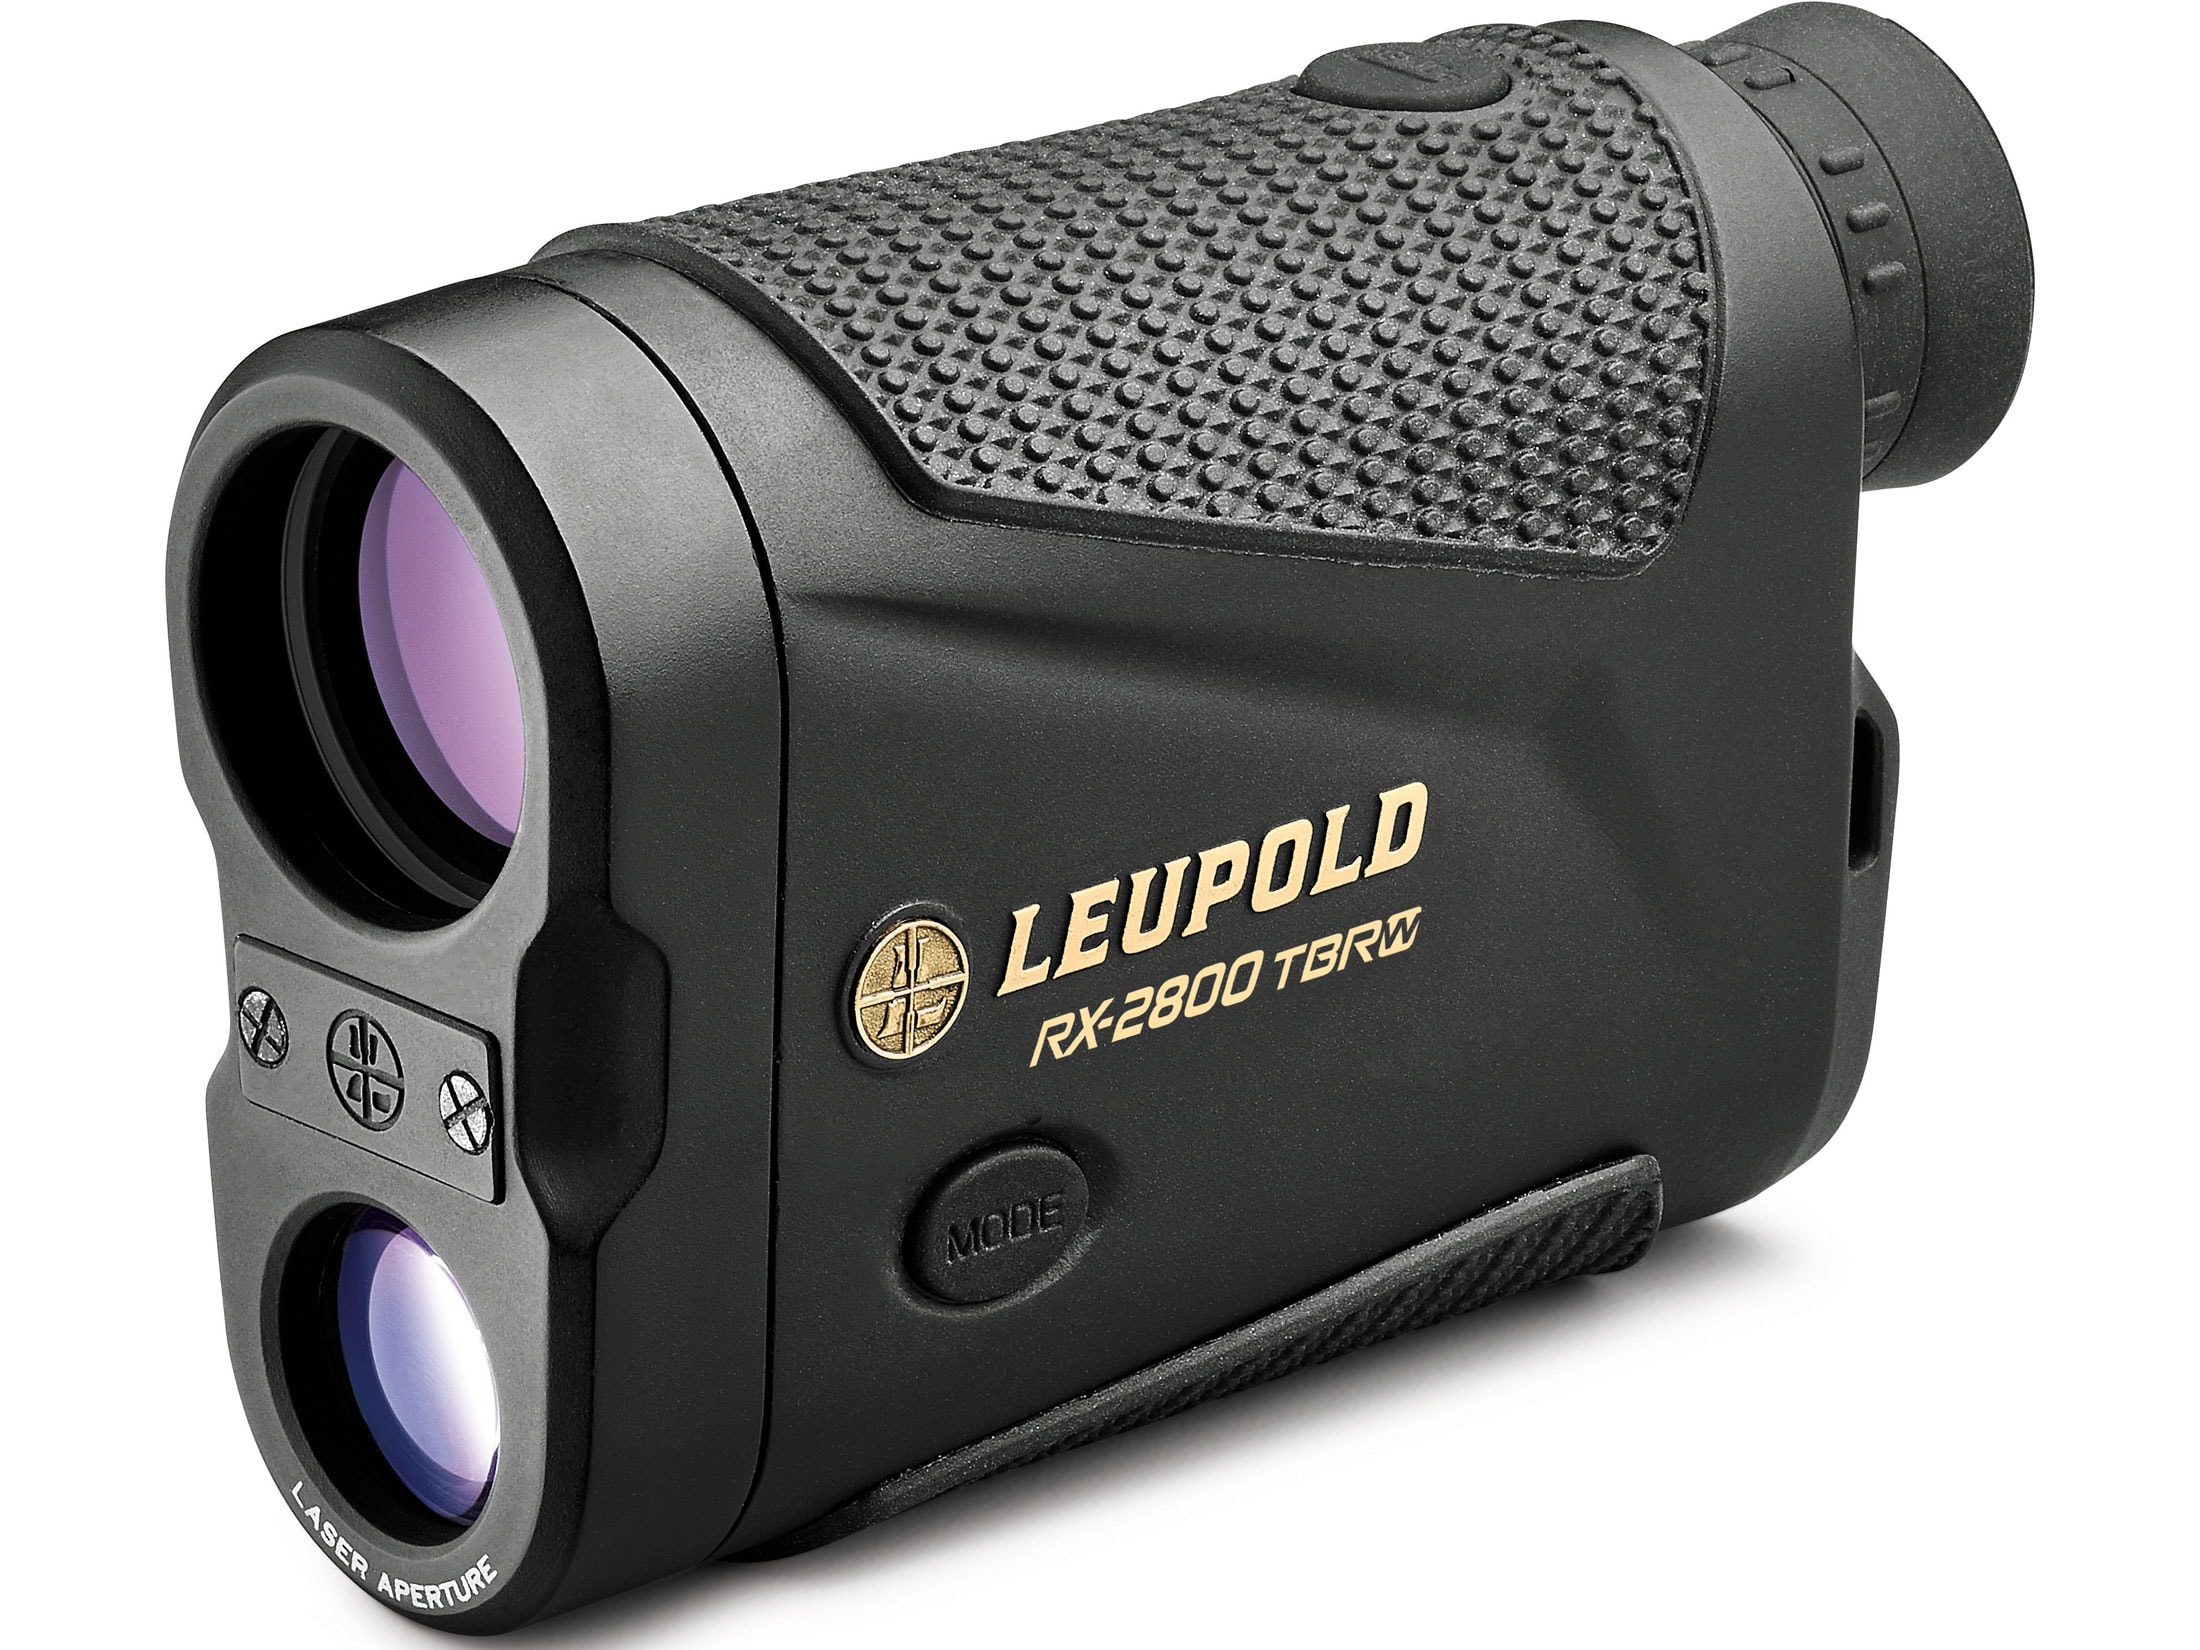 Leupold RX-2800 TBR/W with DNA Laser Rangefinder 7x OLED Selectable For Sale